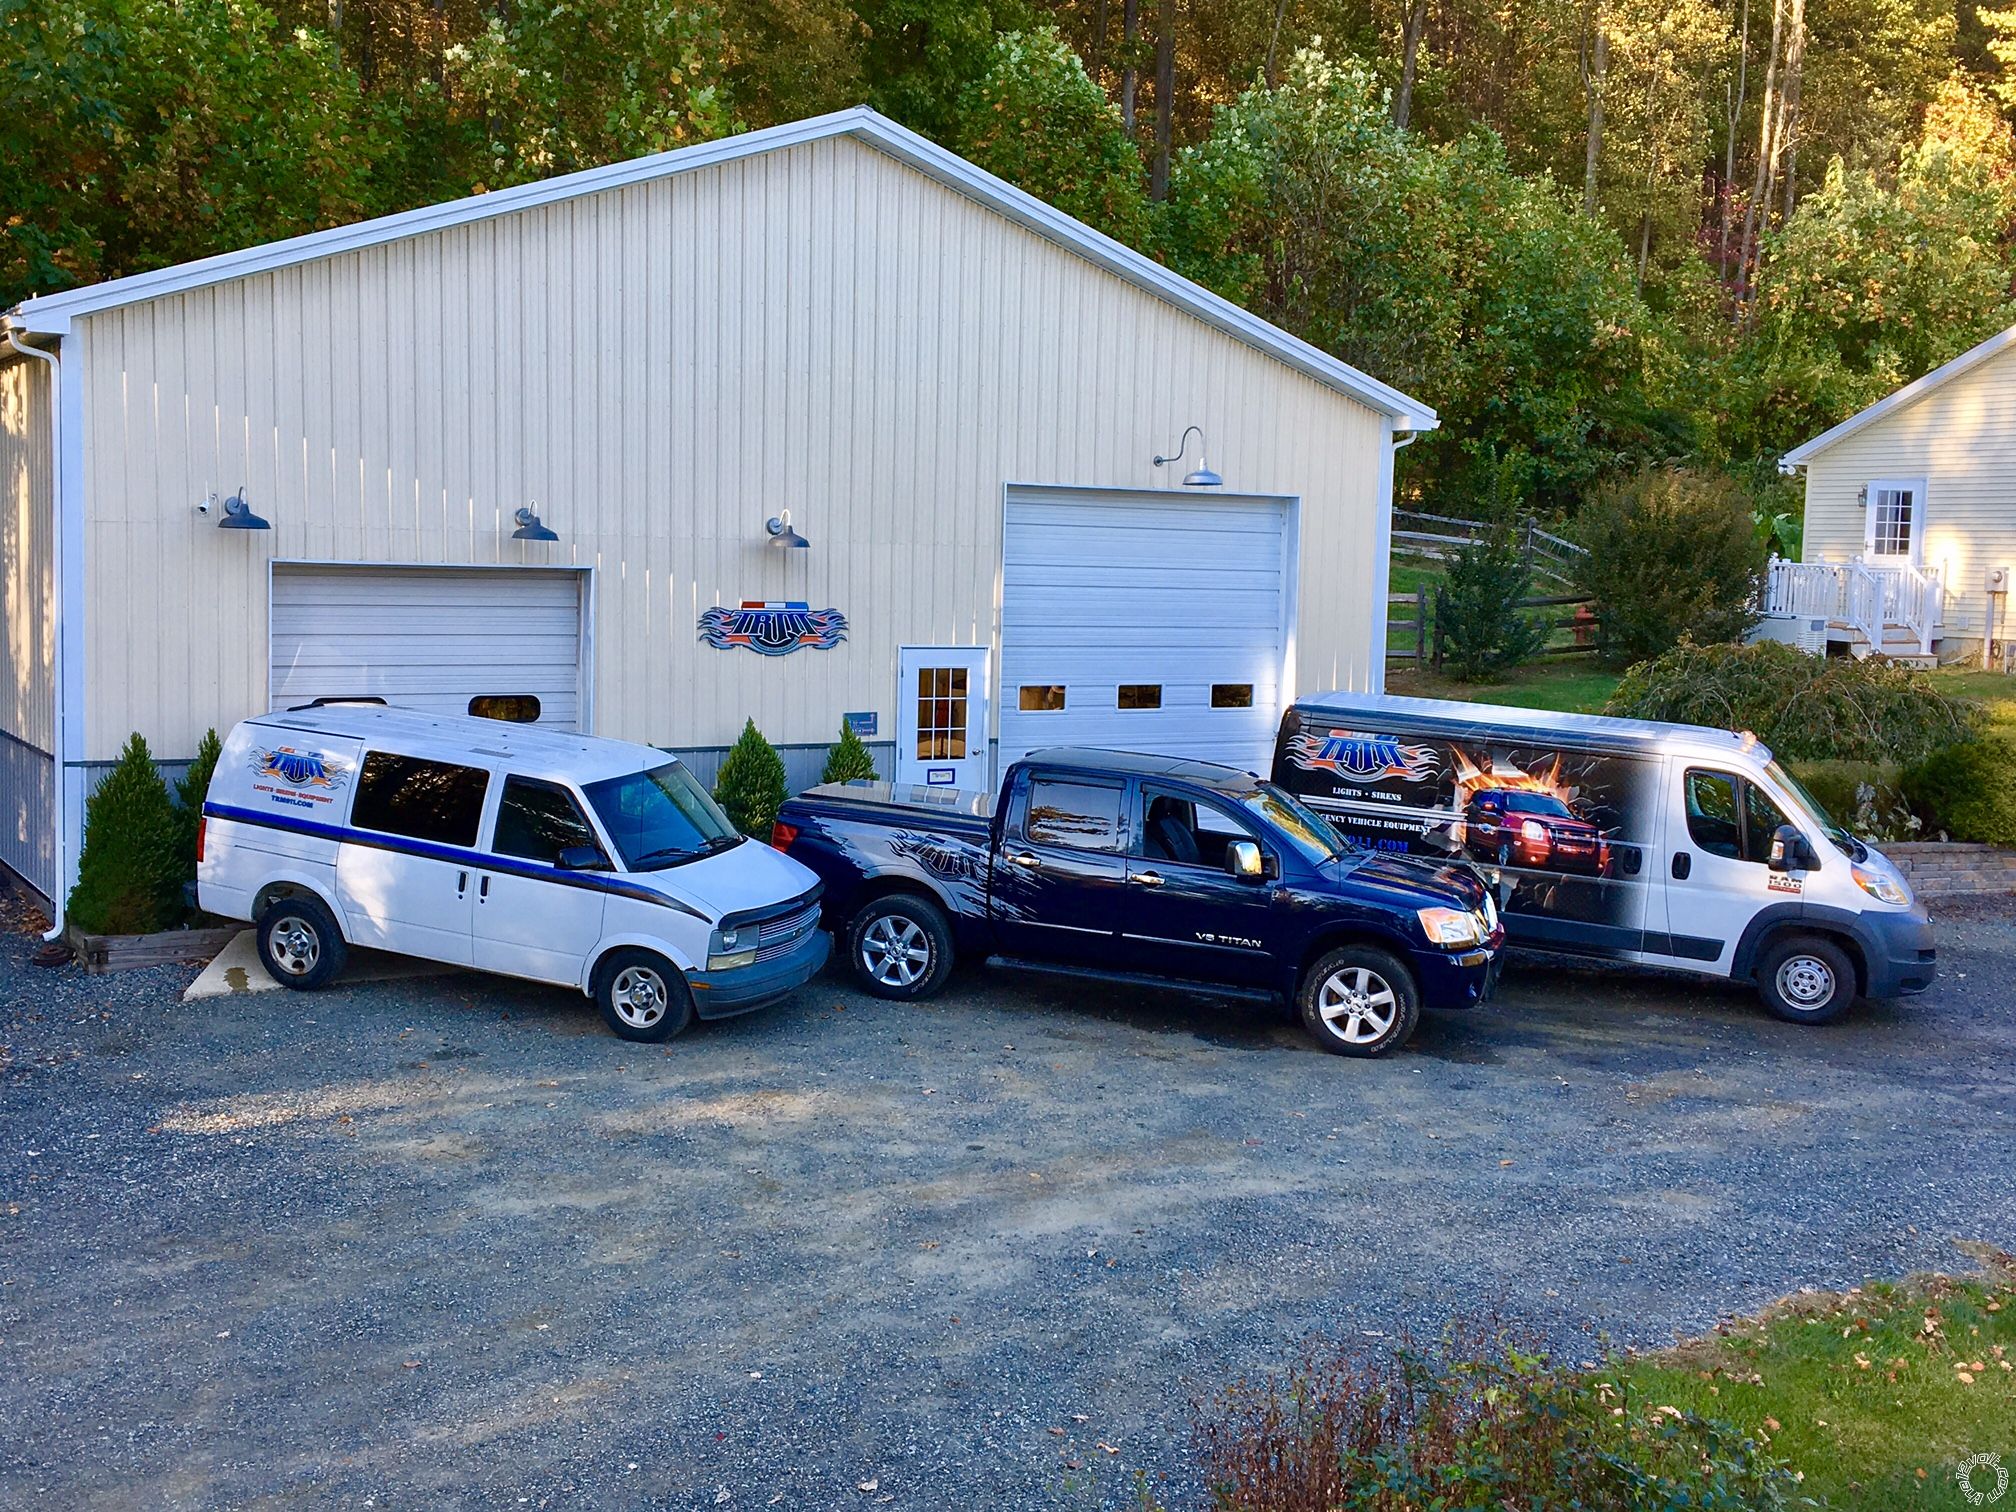 Emergency Vehicle Installer - Reading PA - Last Post -- posted image.